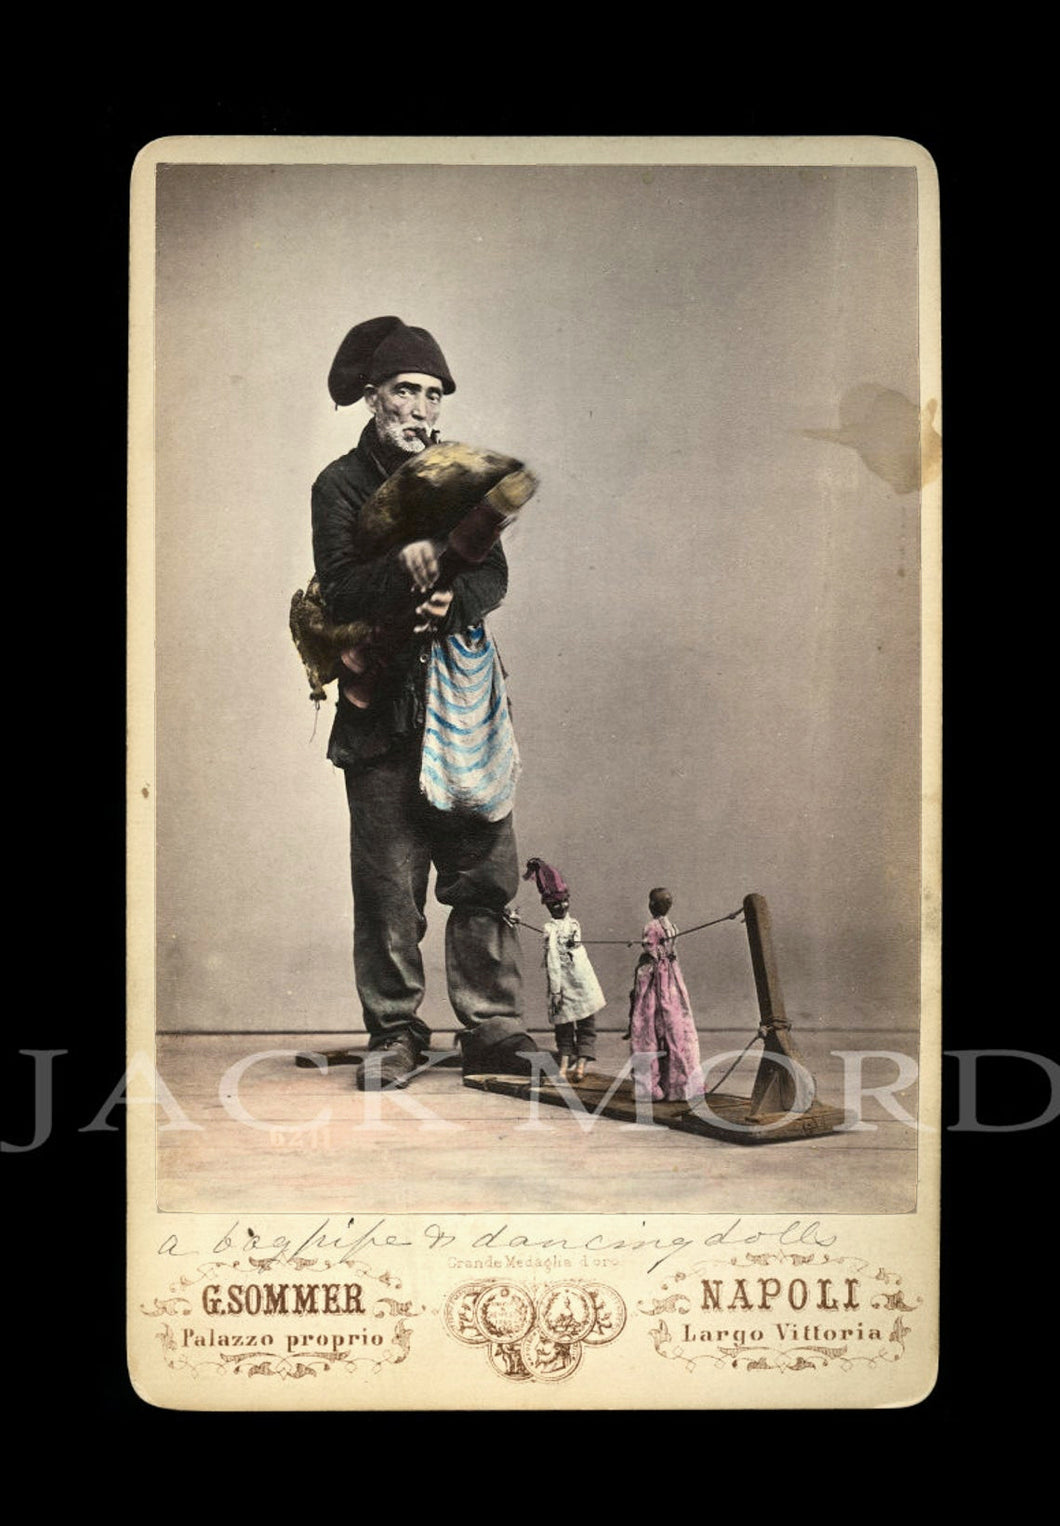 Tinted Photo Puppeteer with Dancing Black Puppets or Dolls / Rare Occupational